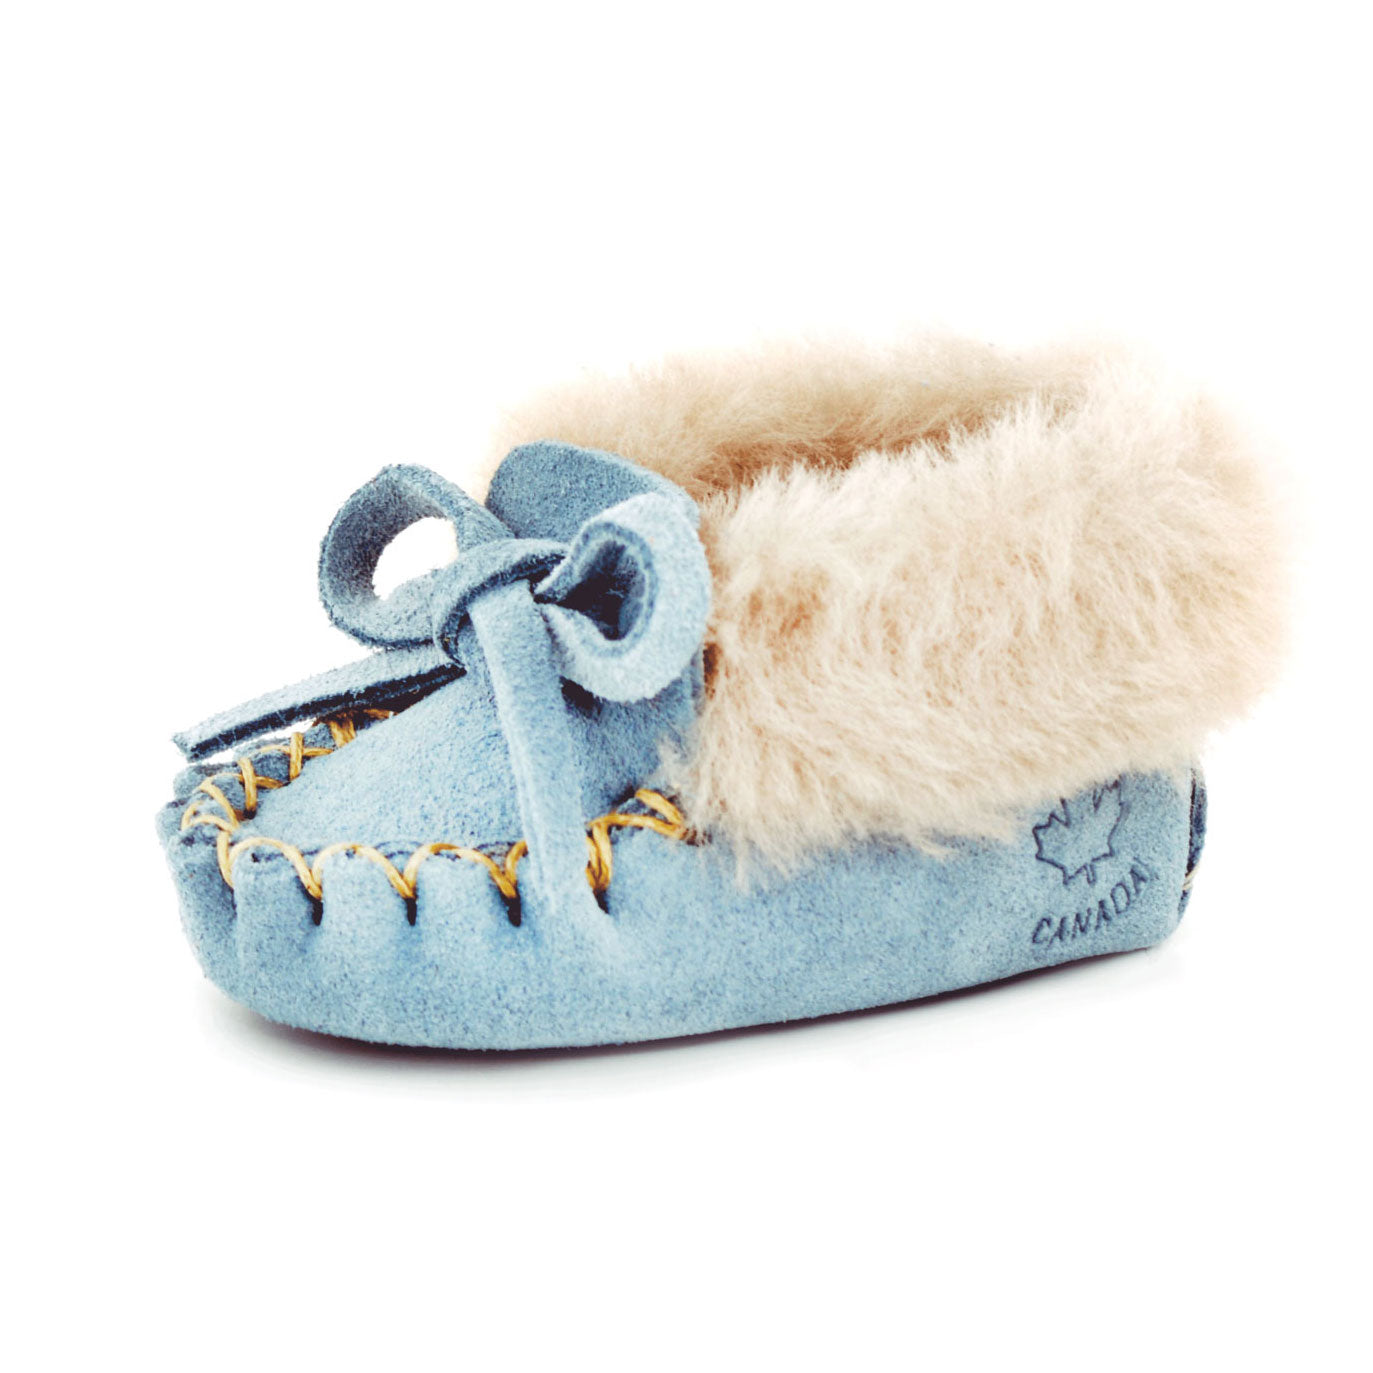 Soft leather baby moccasins  in baby blue with sheepskin  at Bonjour Baby Baskets